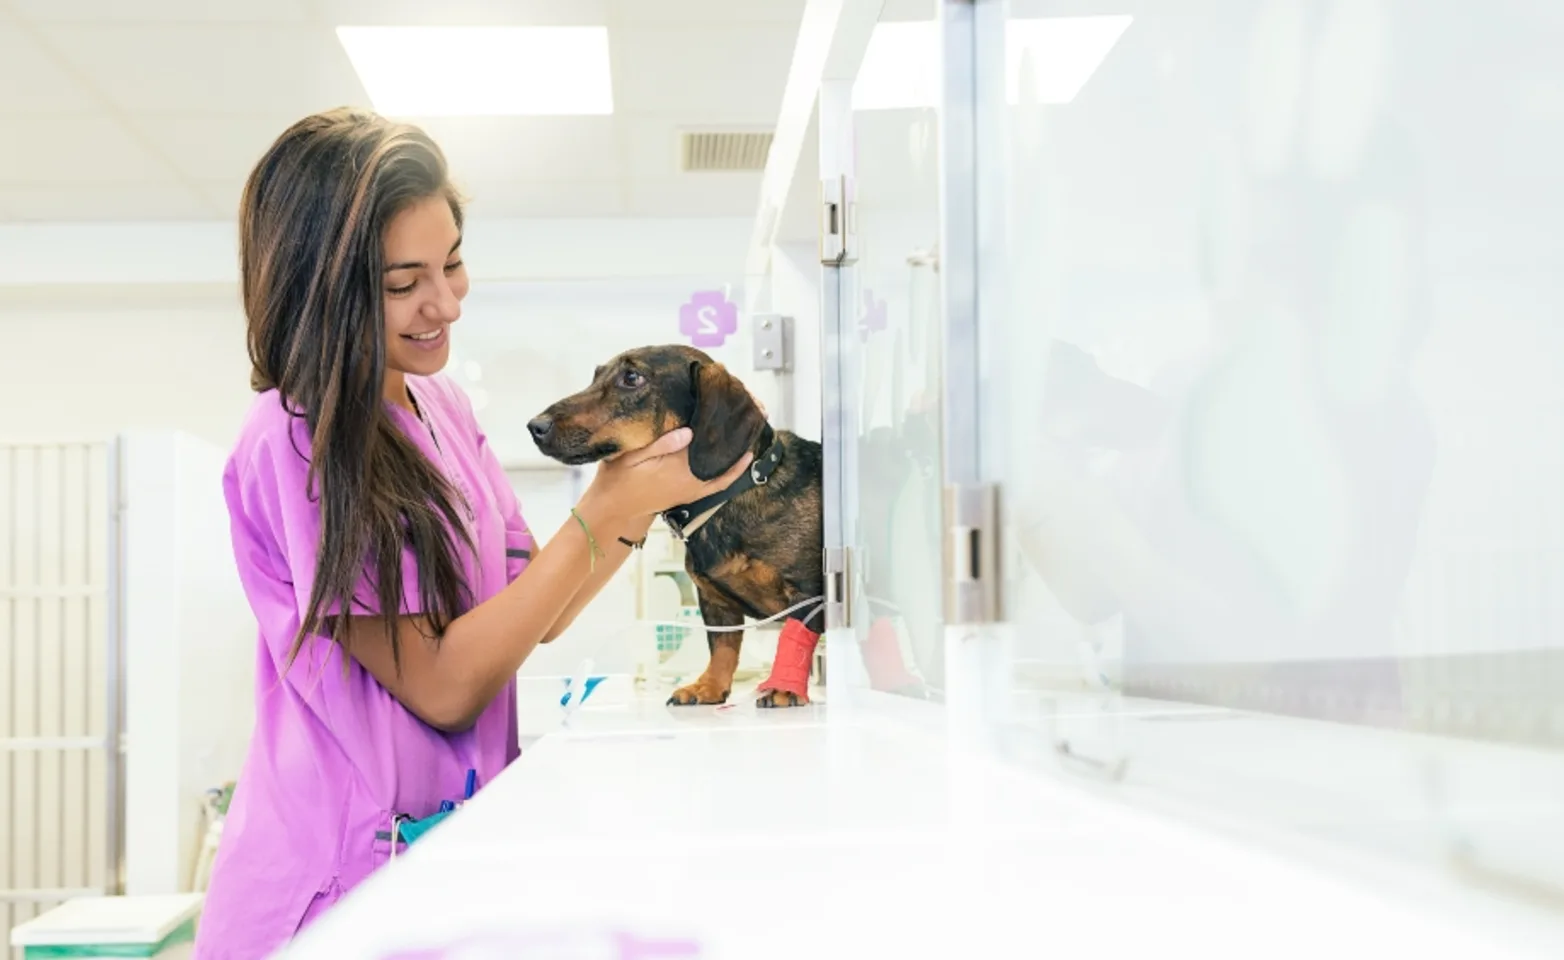 A veterinary professional petting a dachshund that has an IV in its leg